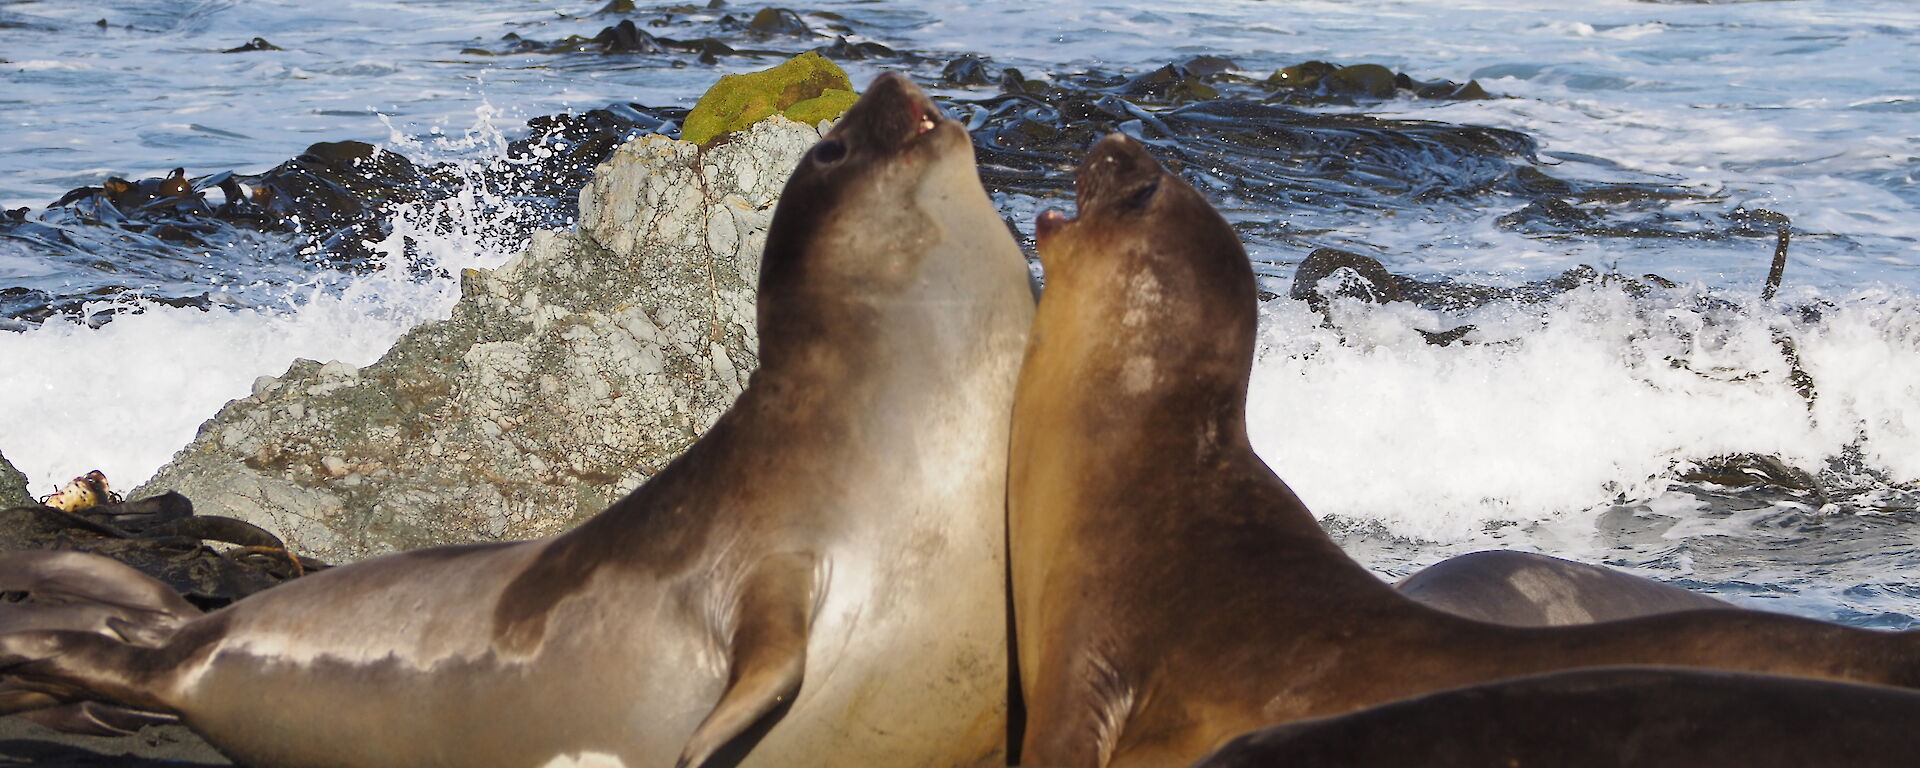 Two elephant seals sparring on the beach on Macquarie Island